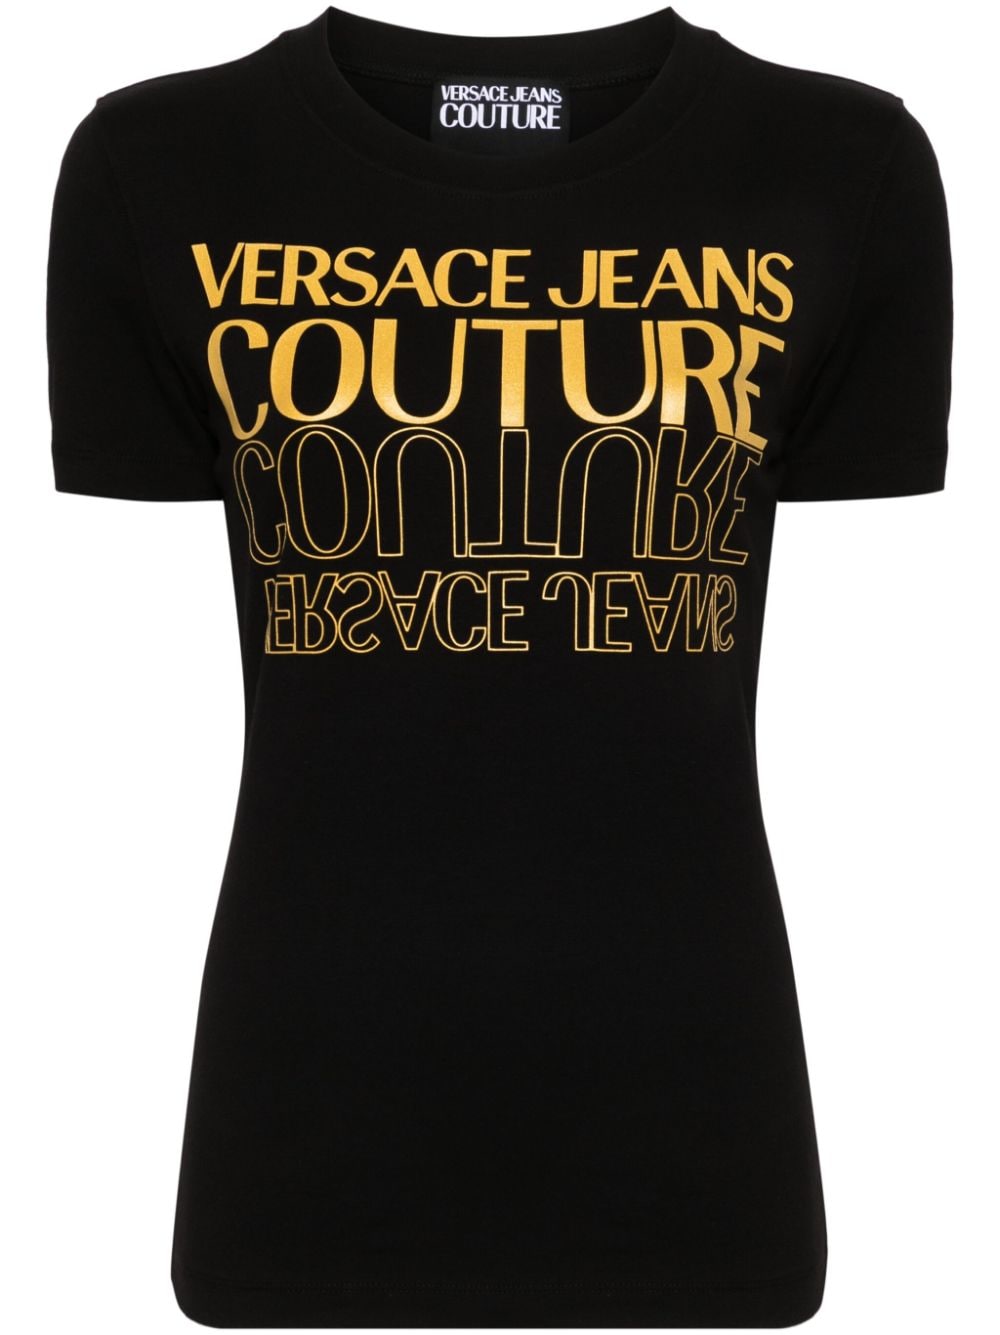 Versace Jeans Couture T-Shirt mit Upside Down-Logo - Schwarz von Versace Jeans Couture